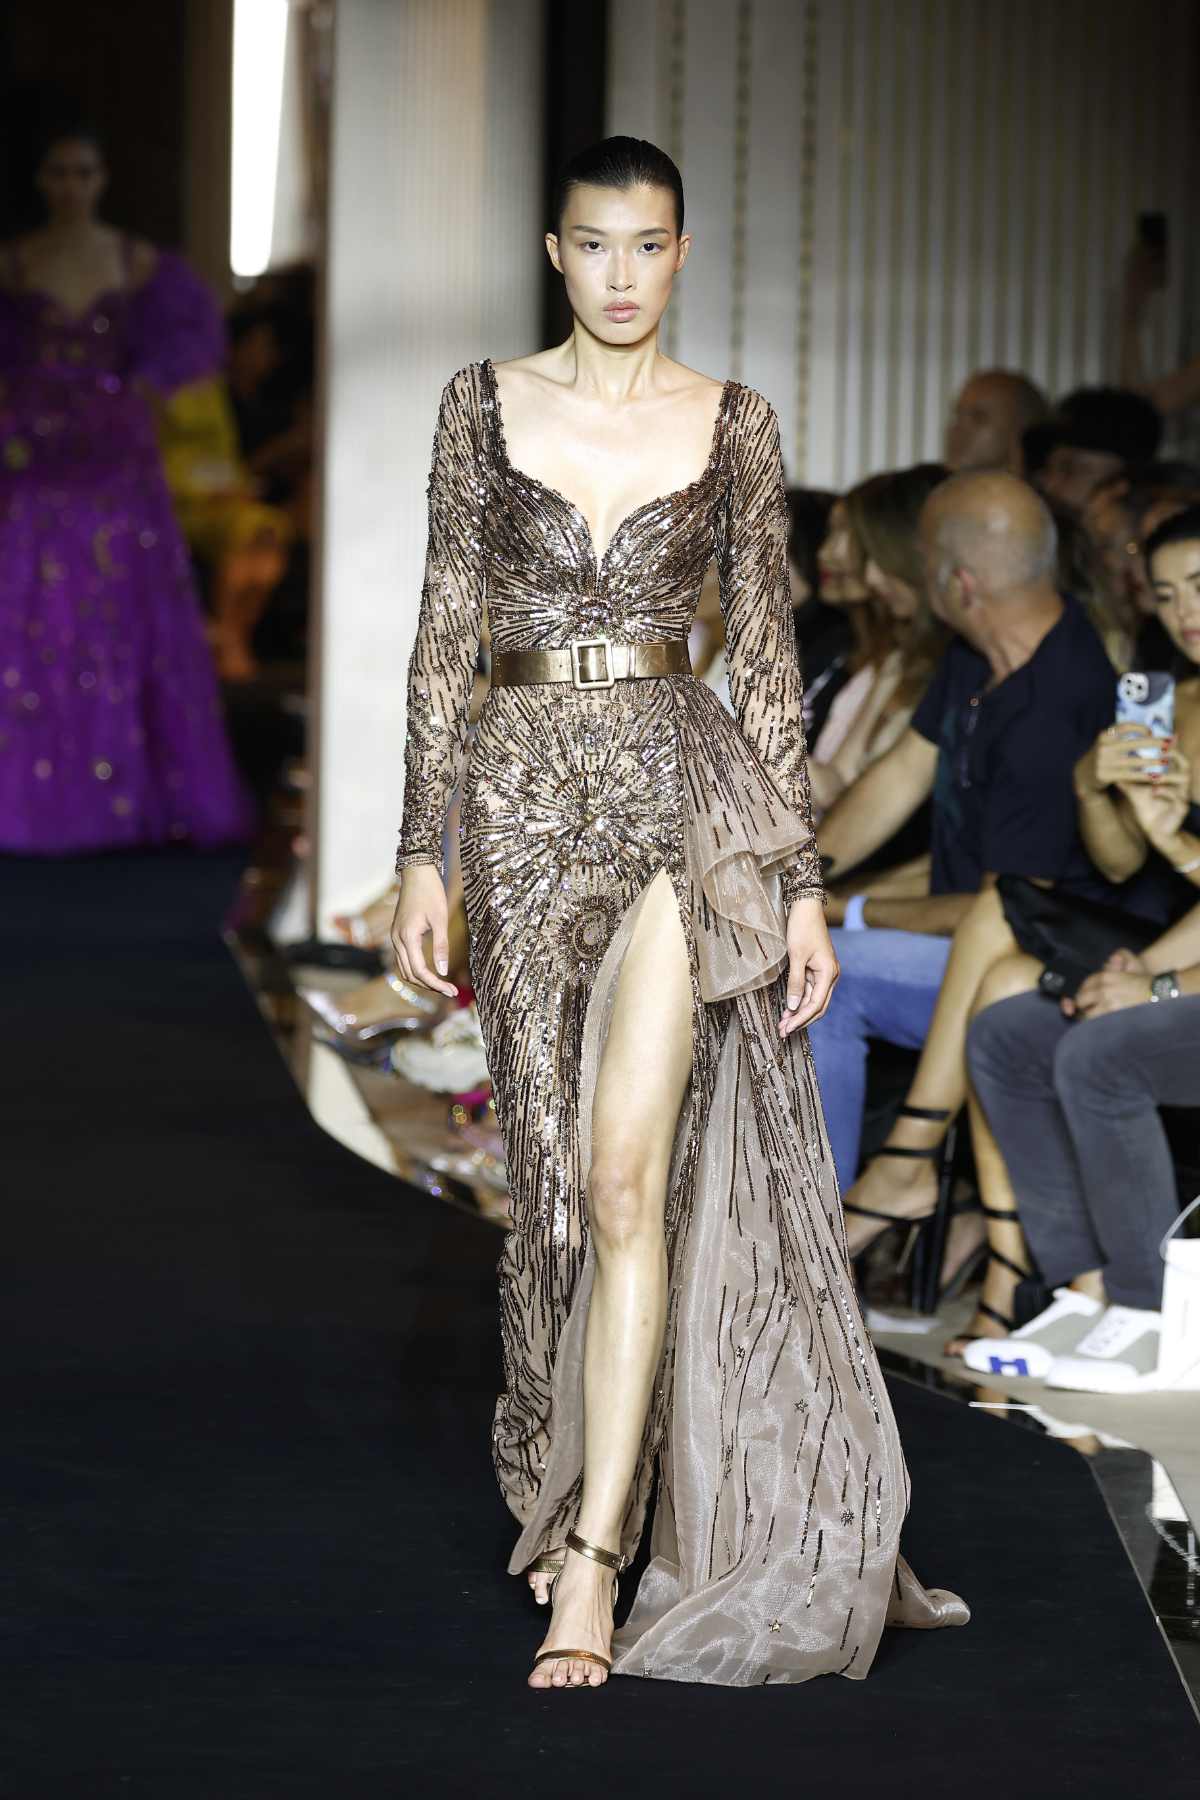 Zuhair Murad Presents Its New Couture Fall/Winter 2022-23 Collection: “Les Arts Divinatoires”